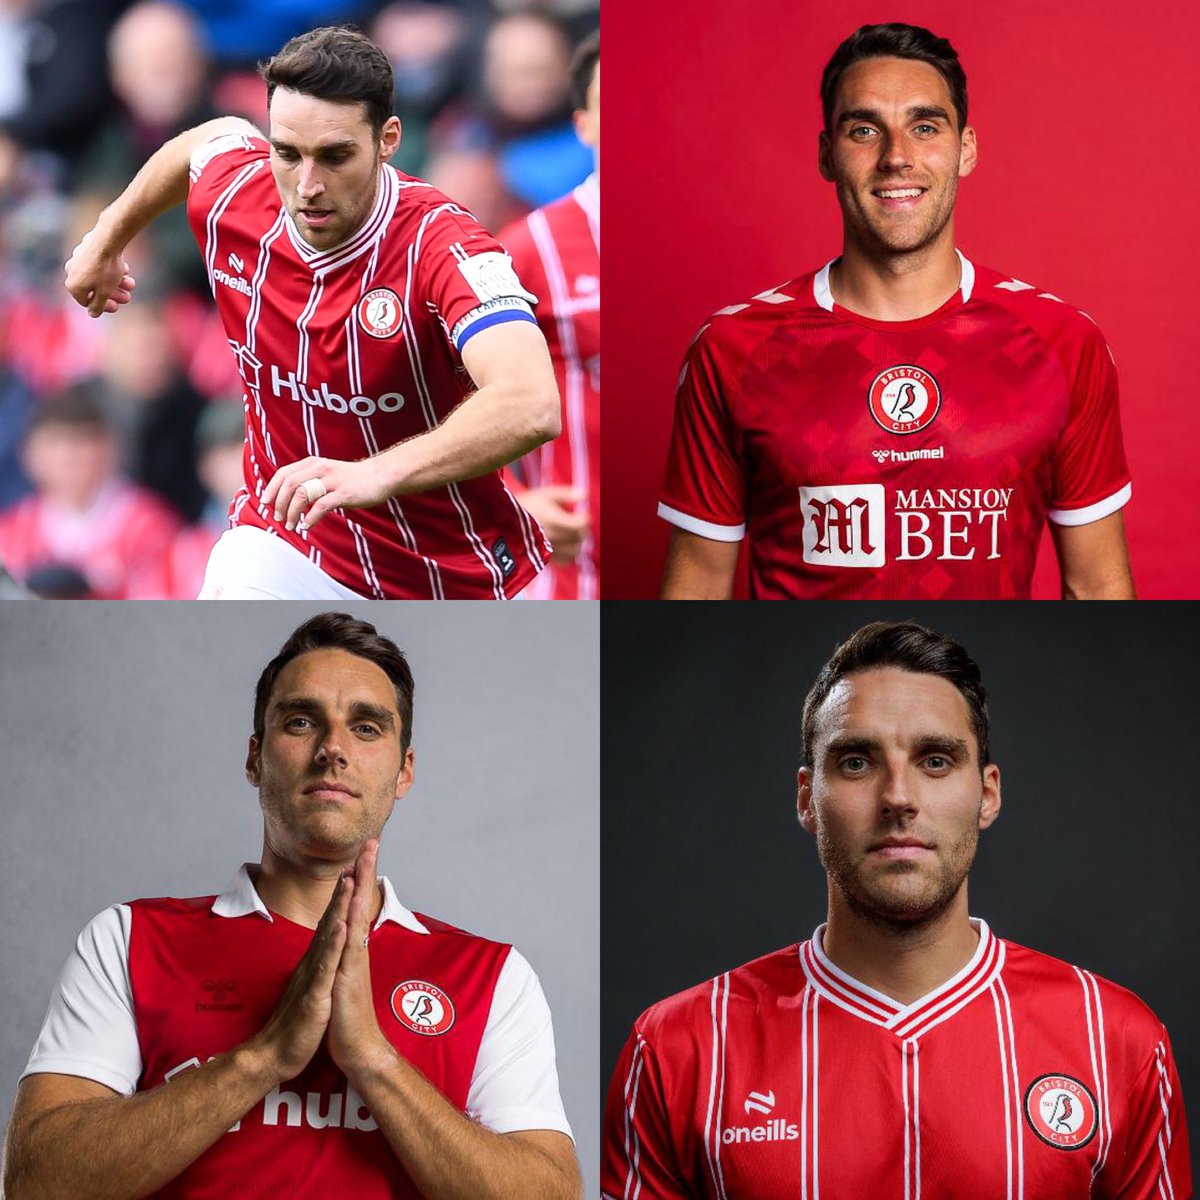 Welcome to the Former Players Association… Matty James… 115 appearances 4 goals… Captain & Leader… we can’t wait to welcome you back to Ashton Gate 👏🏻